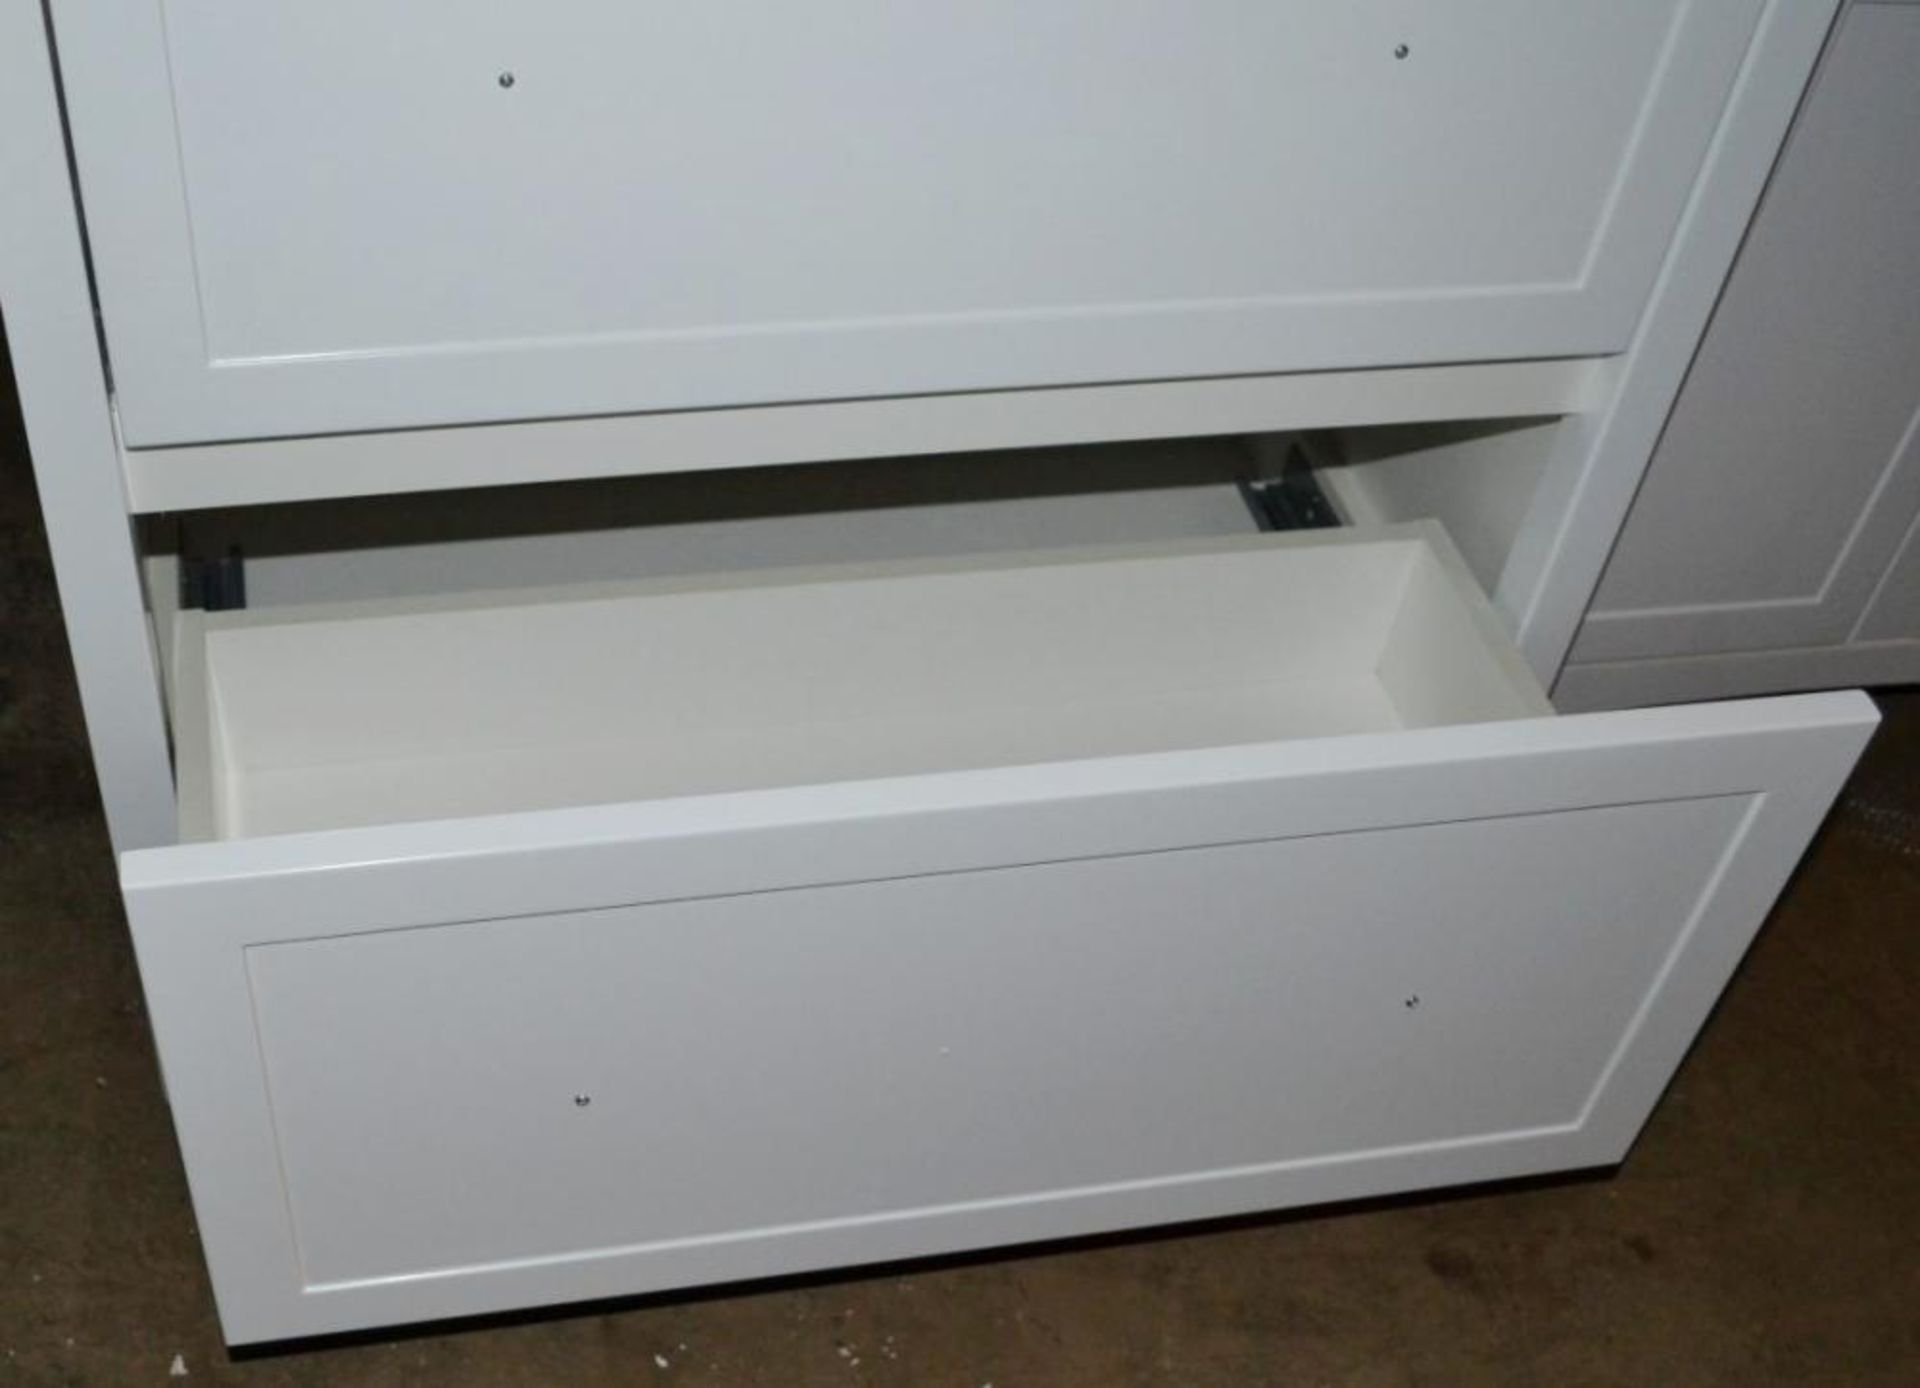 1 x Camberley 800 2-Drawer Soft Close Vanity Unit In White - New / Unused Stock - Dimensions: W80 x - Image 2 of 7